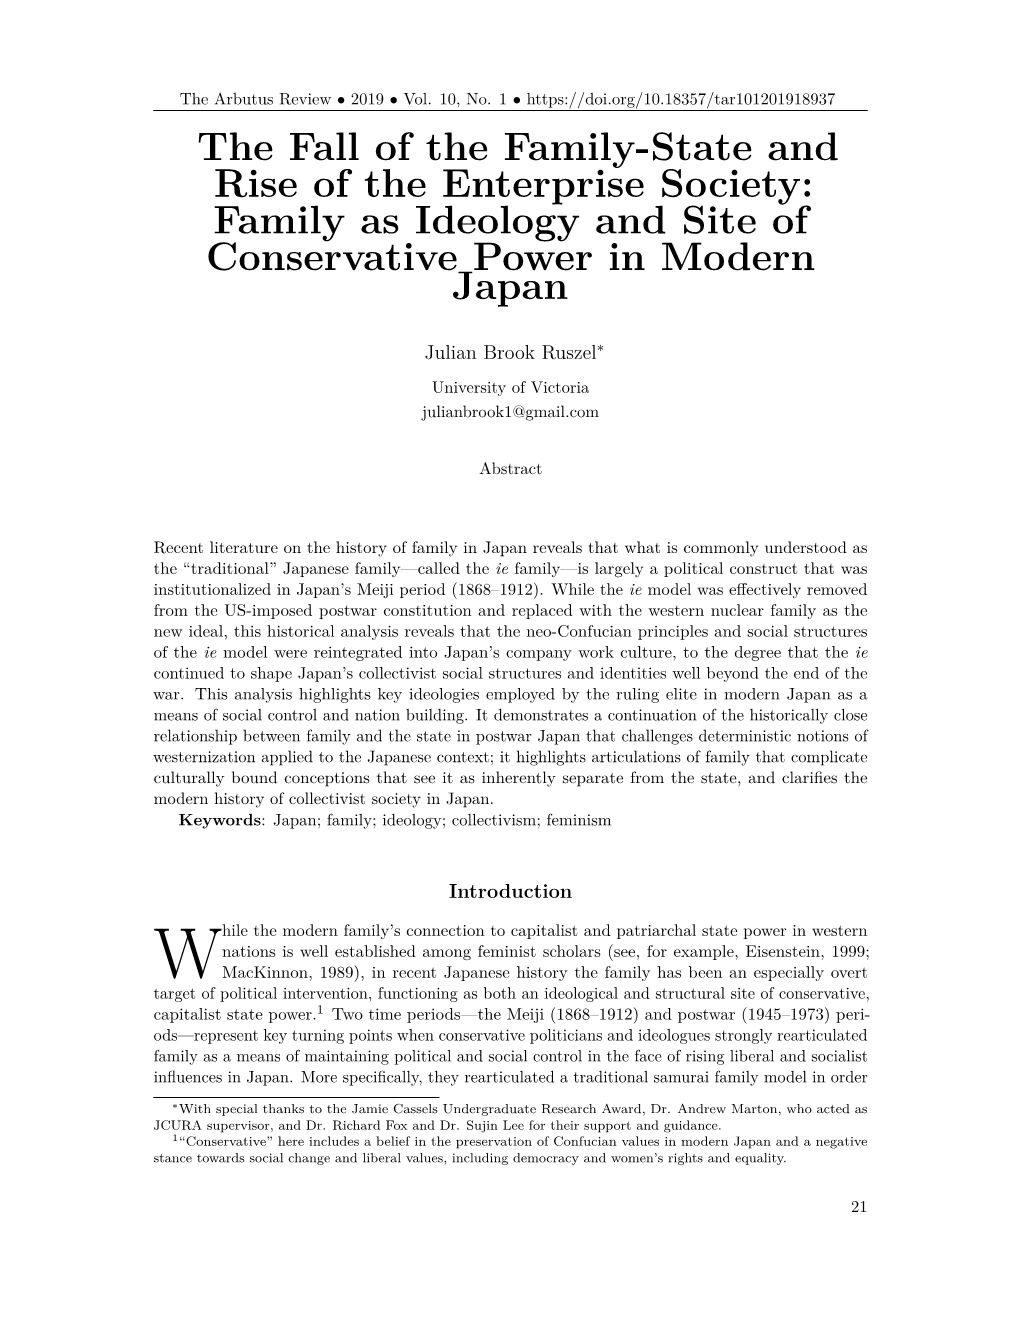 The Fall of the Family-State and Rise of the Enterprise Society: Family As Ideology and Site of Conservative Power in Modern Japan